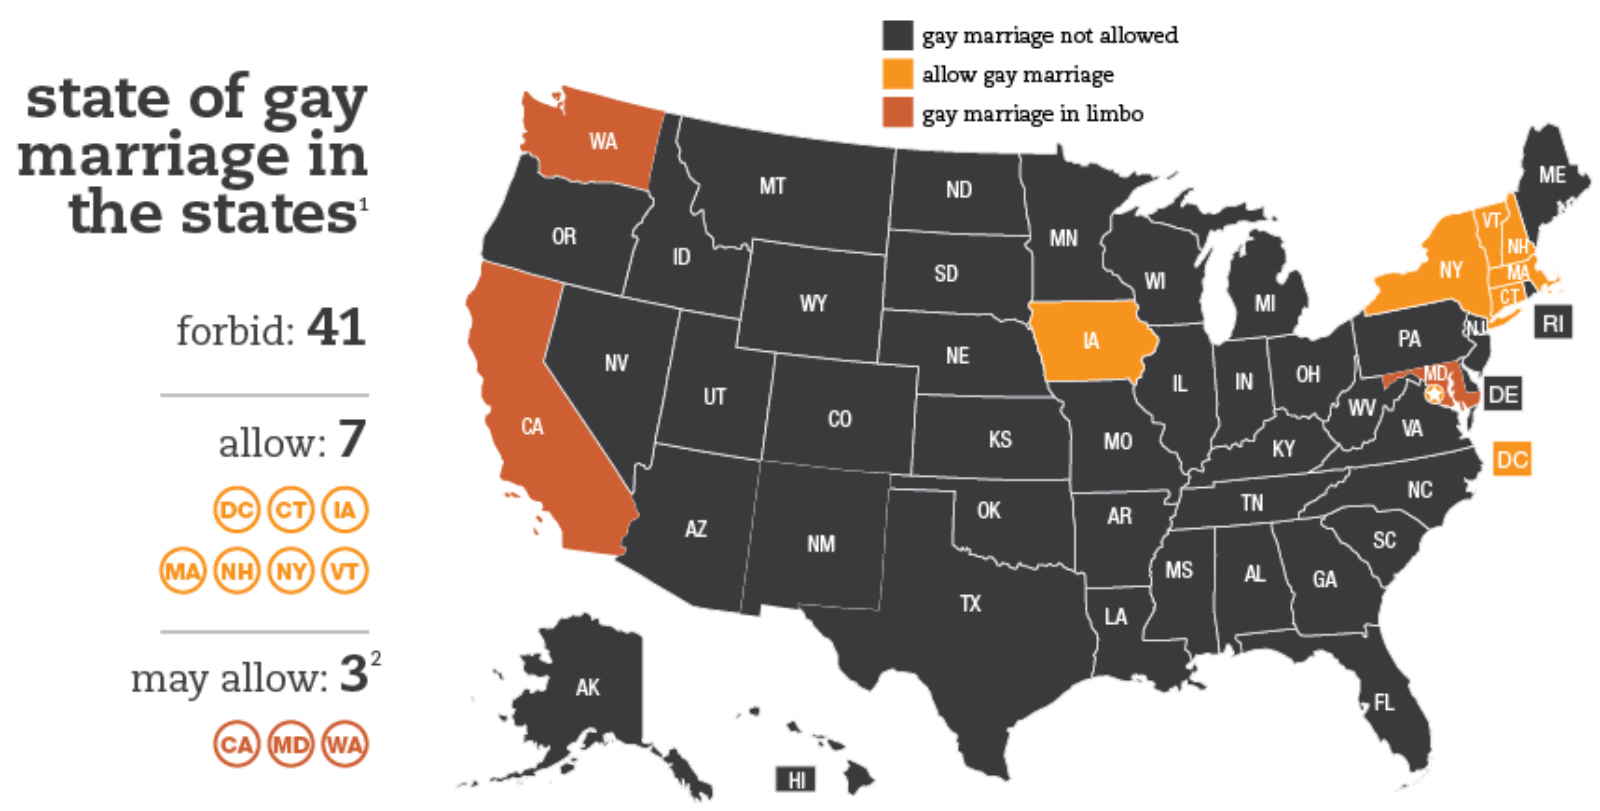 what-states-allow-gay-marriage-what-states-ban-gay-marriage-usa-map.jpg